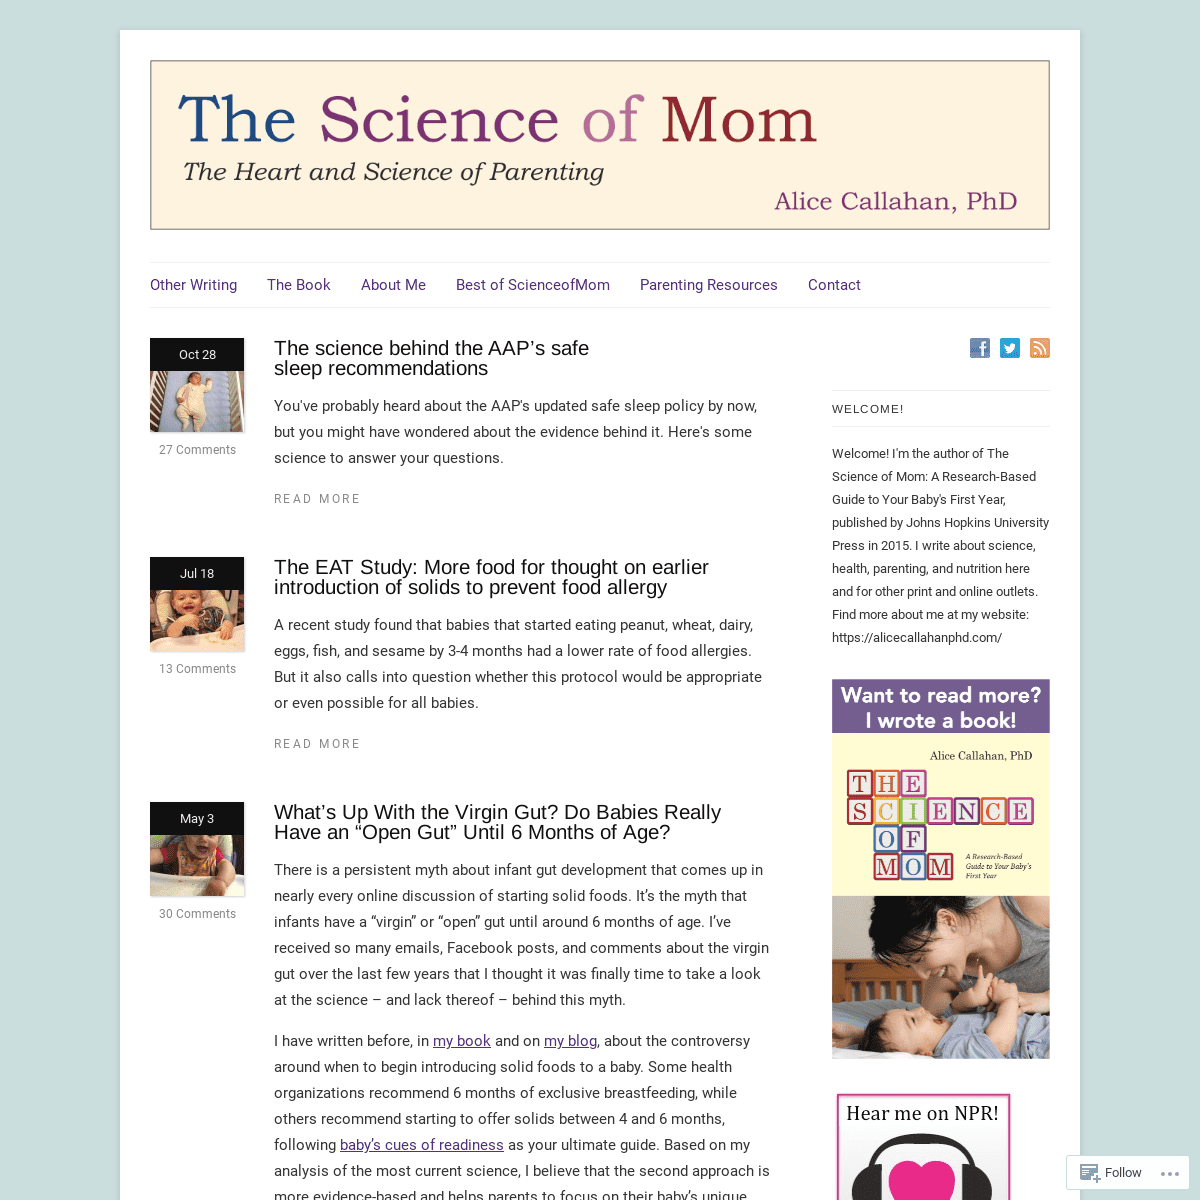 A complete backup of https://scienceofmom.com